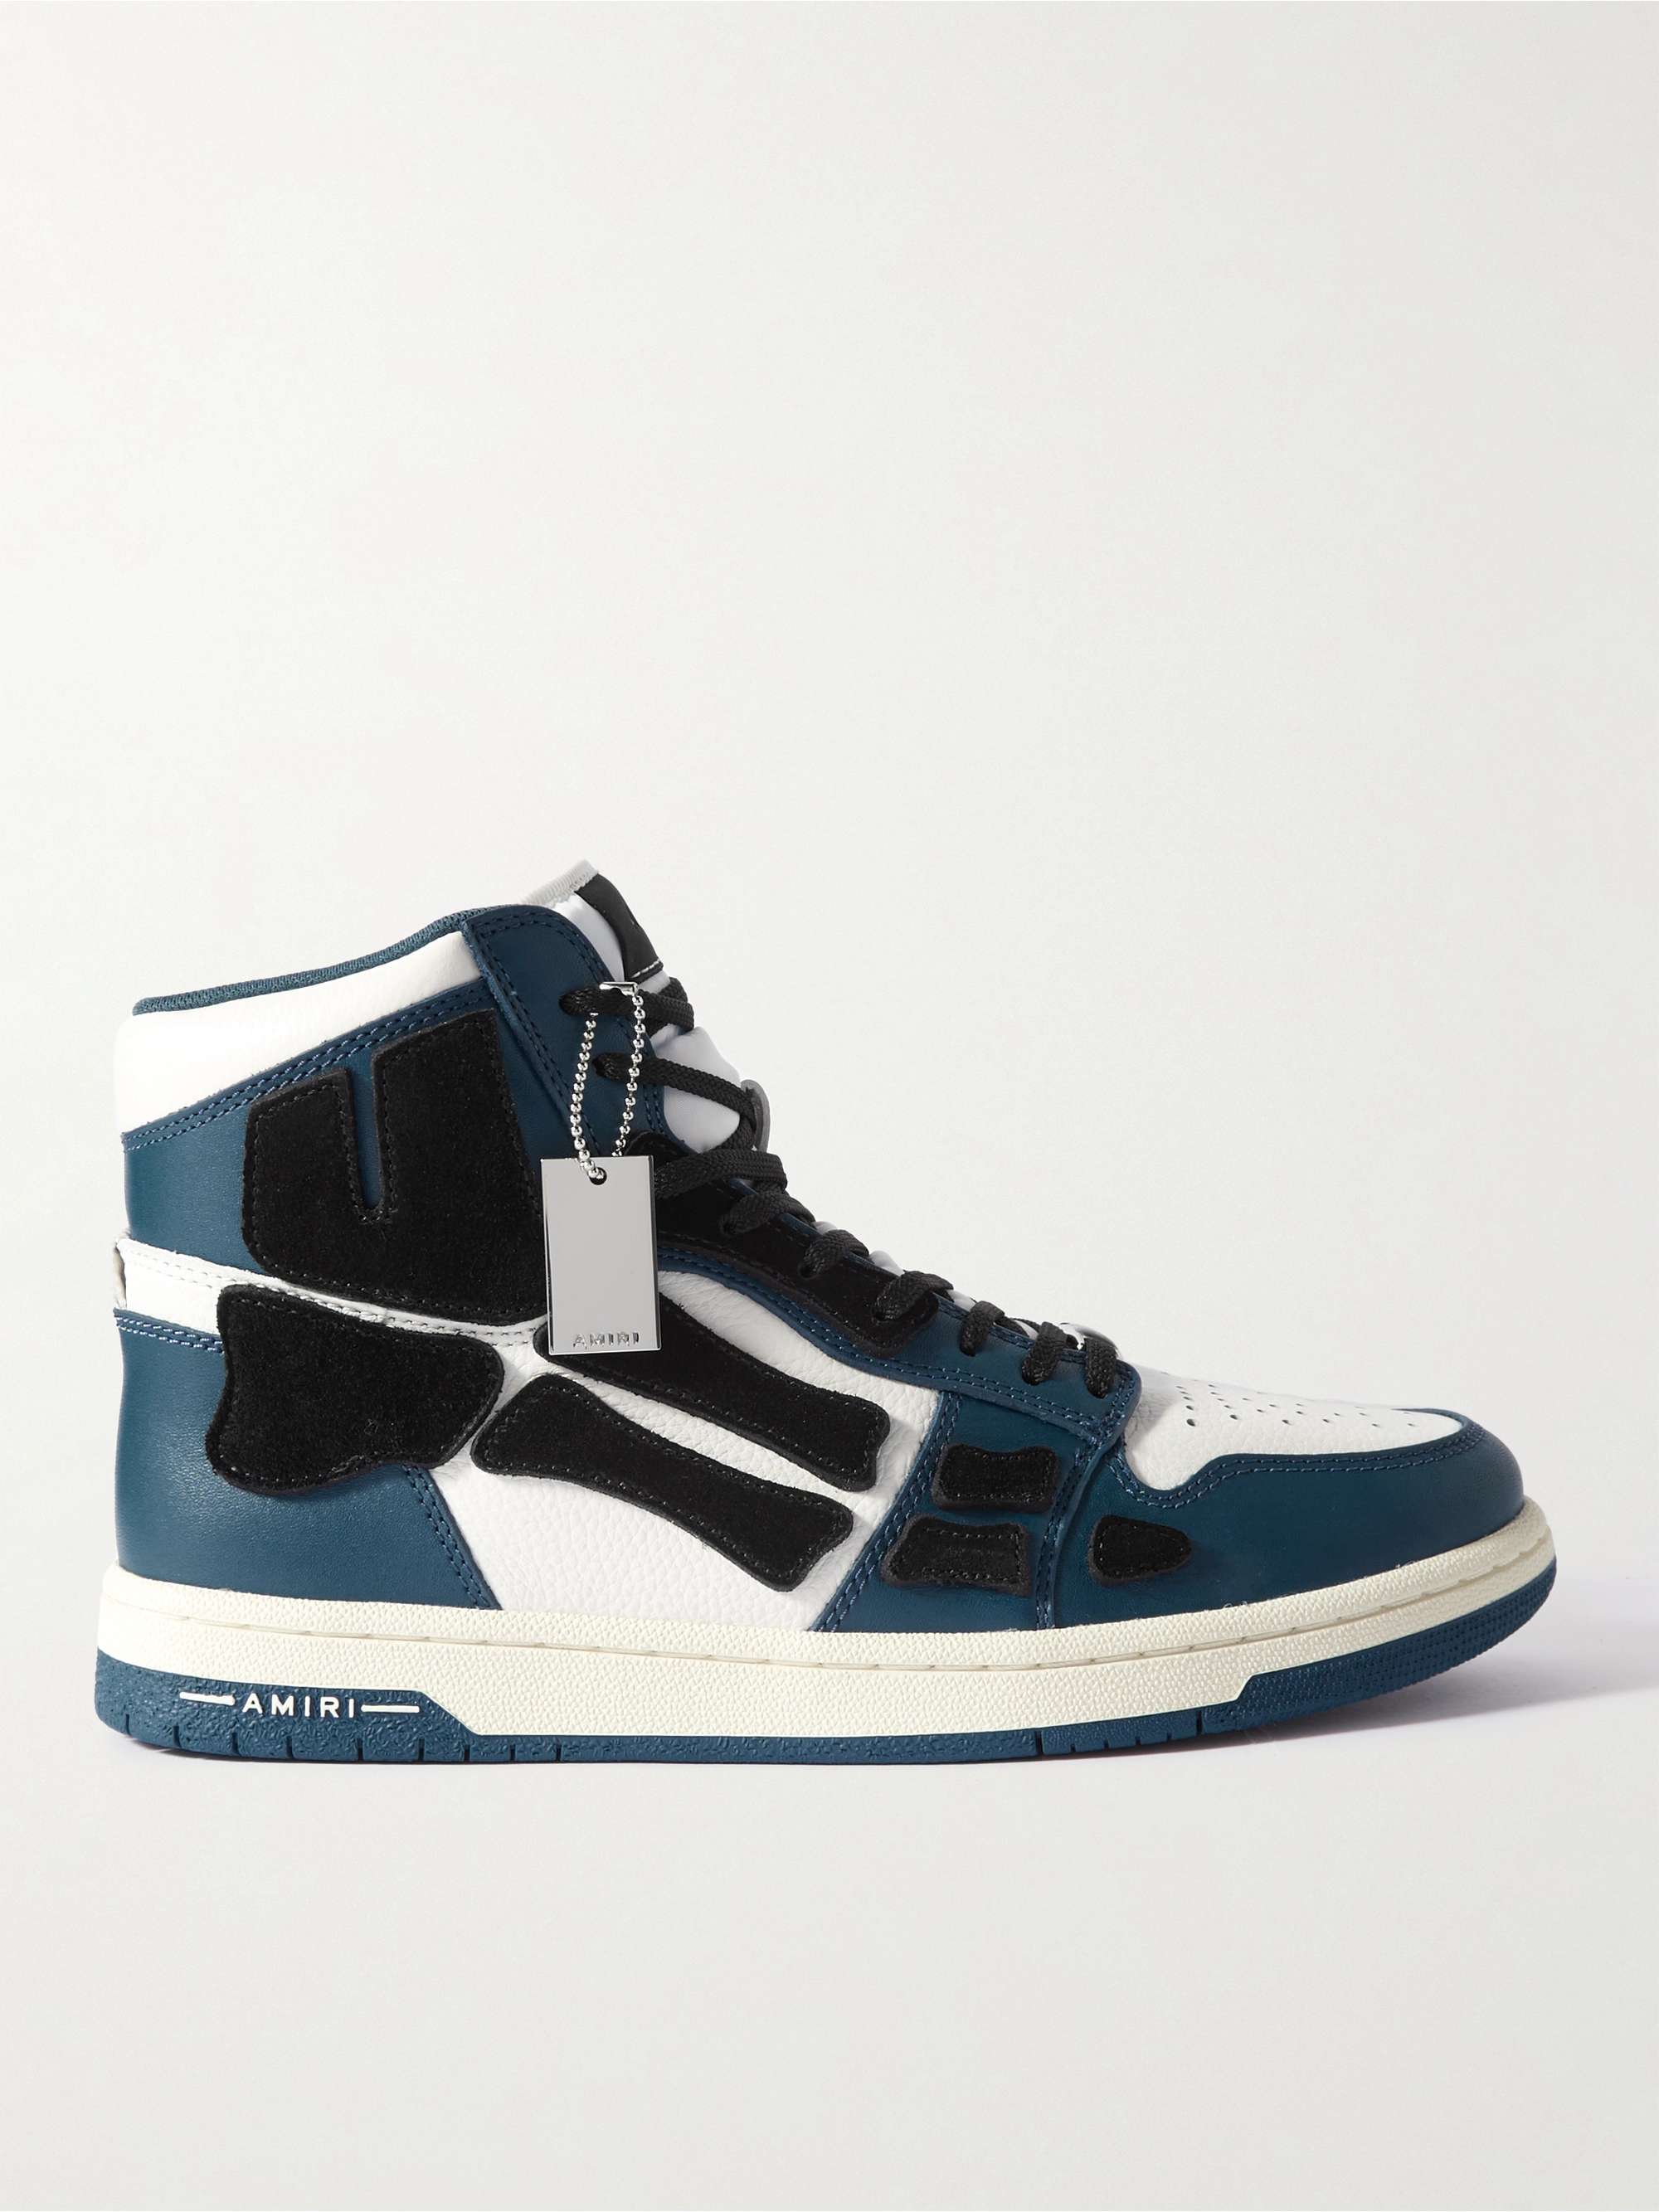 AMIRI Skel-Top Colour-Block Leather and Suede High-Top Sneakers